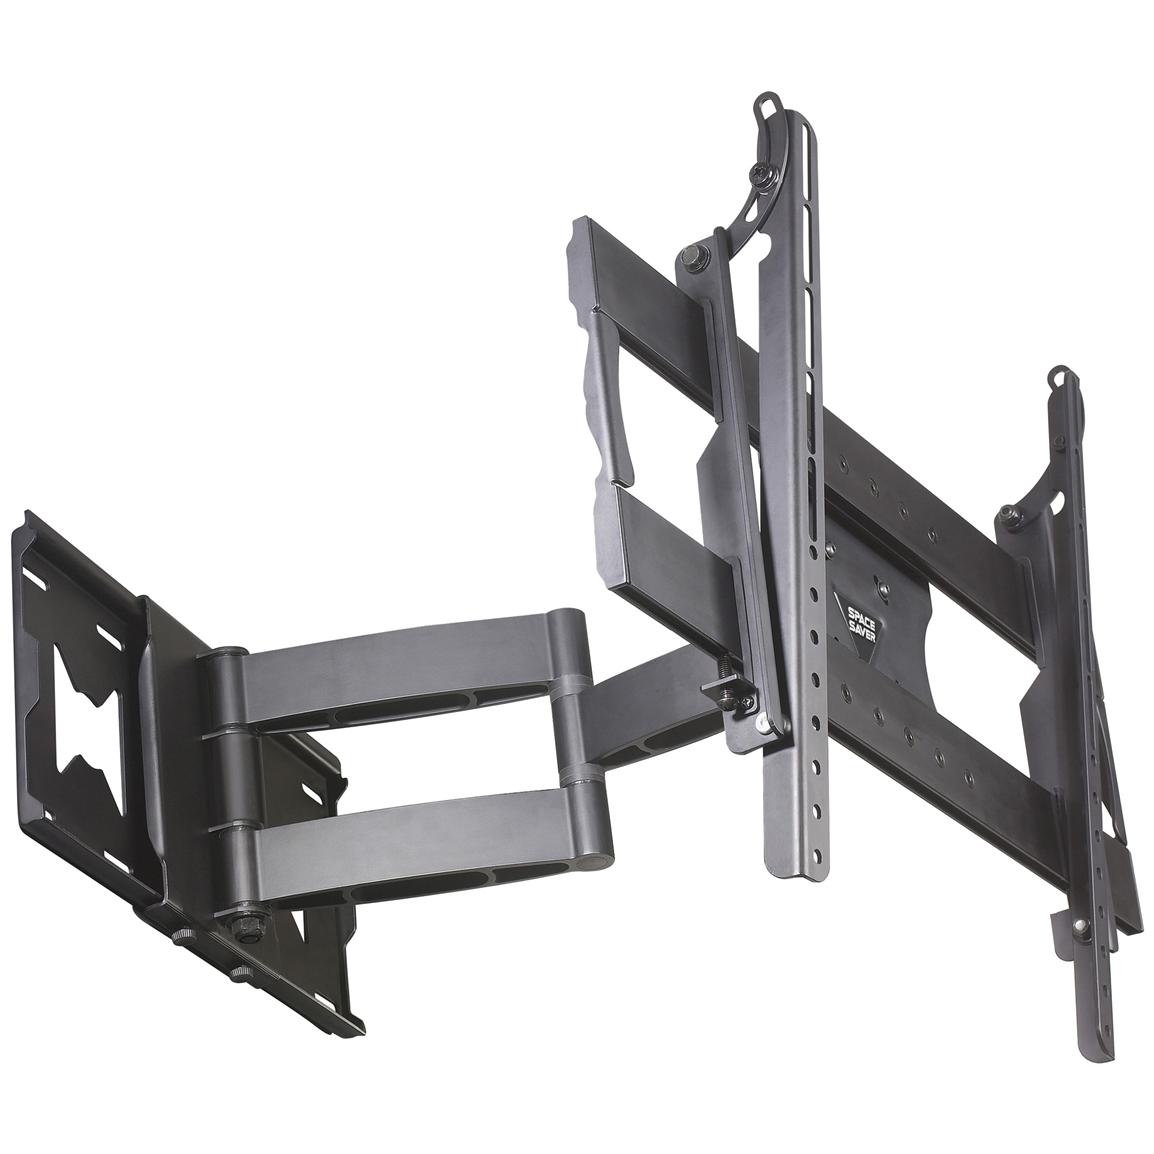 Space Saver™ 30504N Flat Panel TV Full Motion Wall Mount for 30